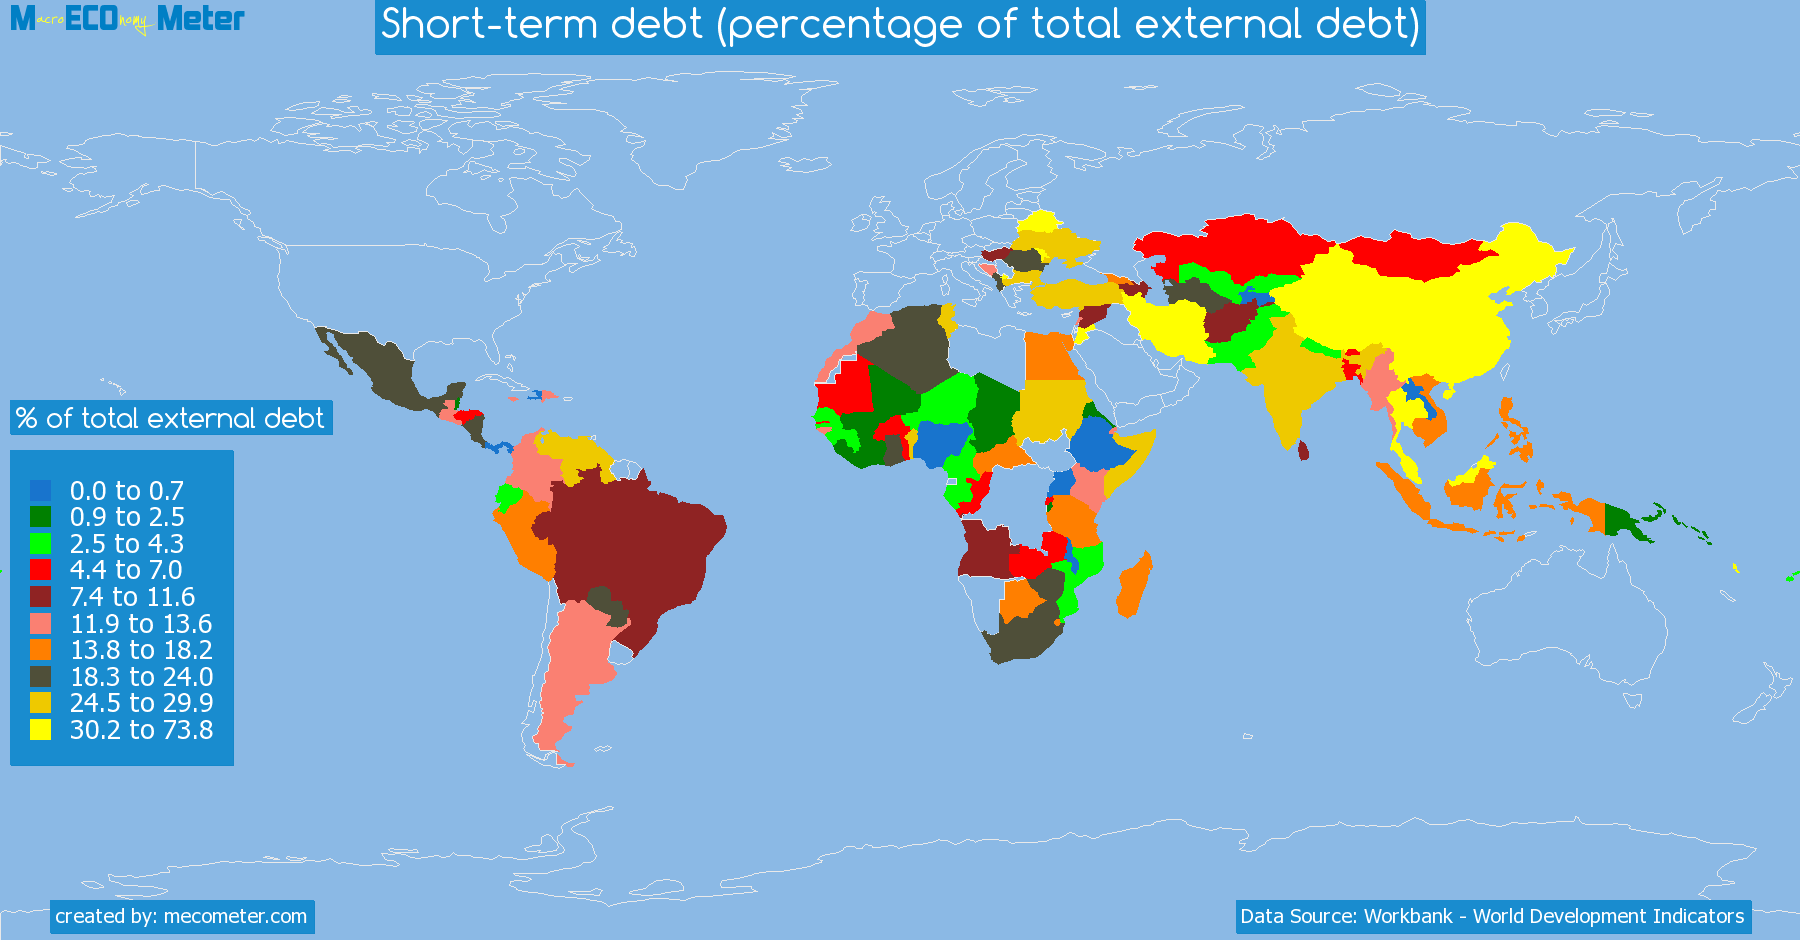 list of countries by Short-term debt (percentage of total external debt)